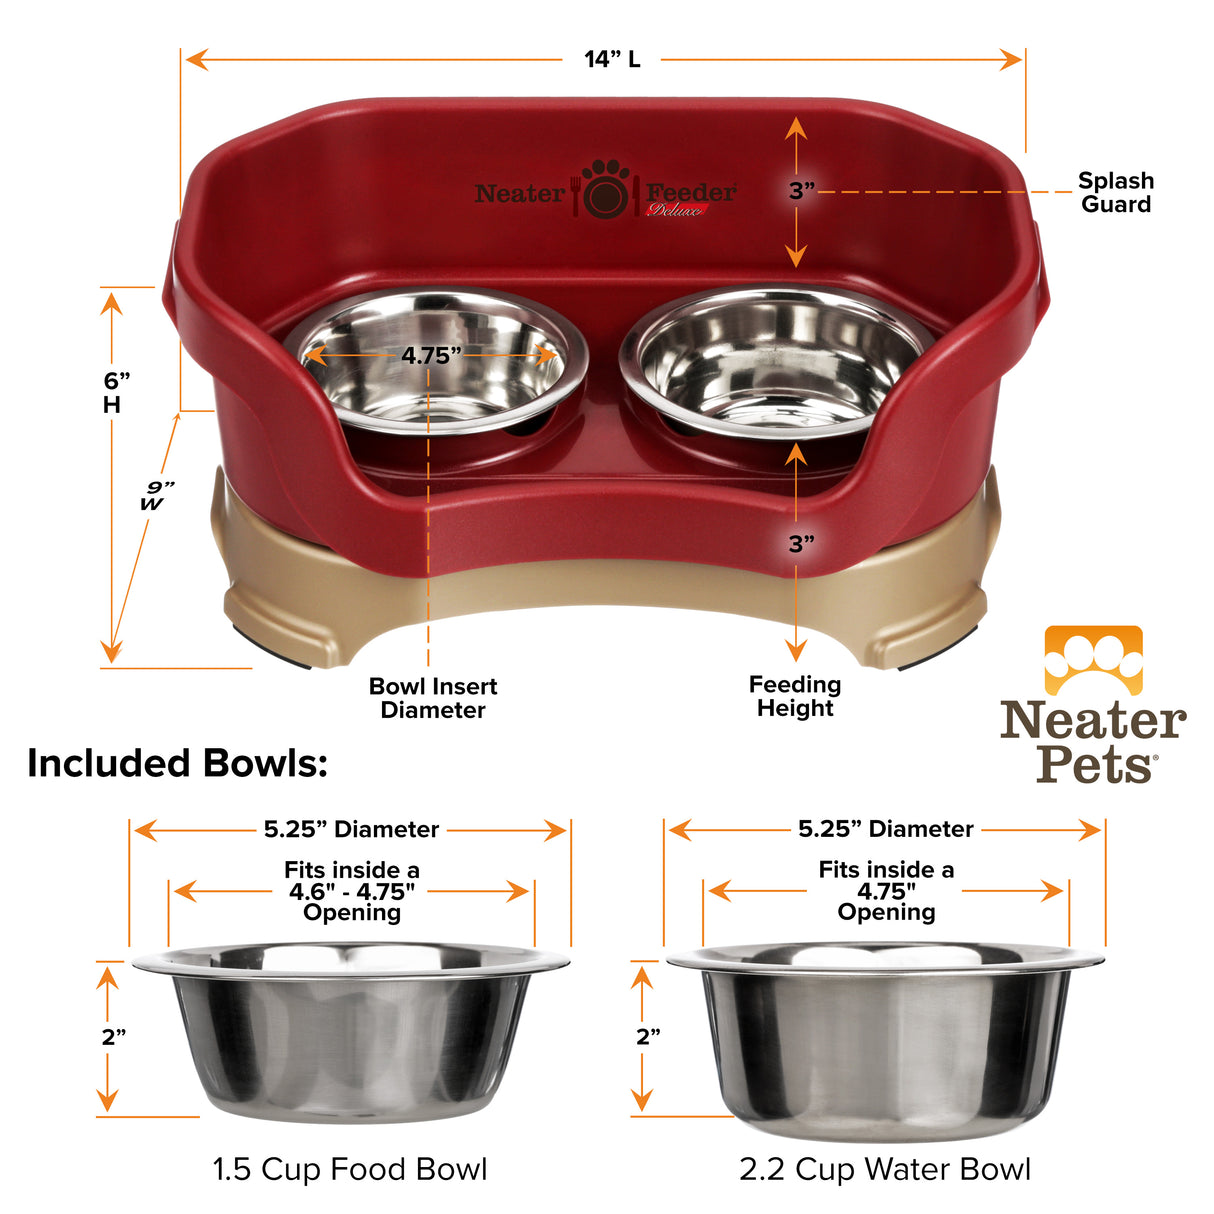 Deluxe small feeder and bowl dimensions